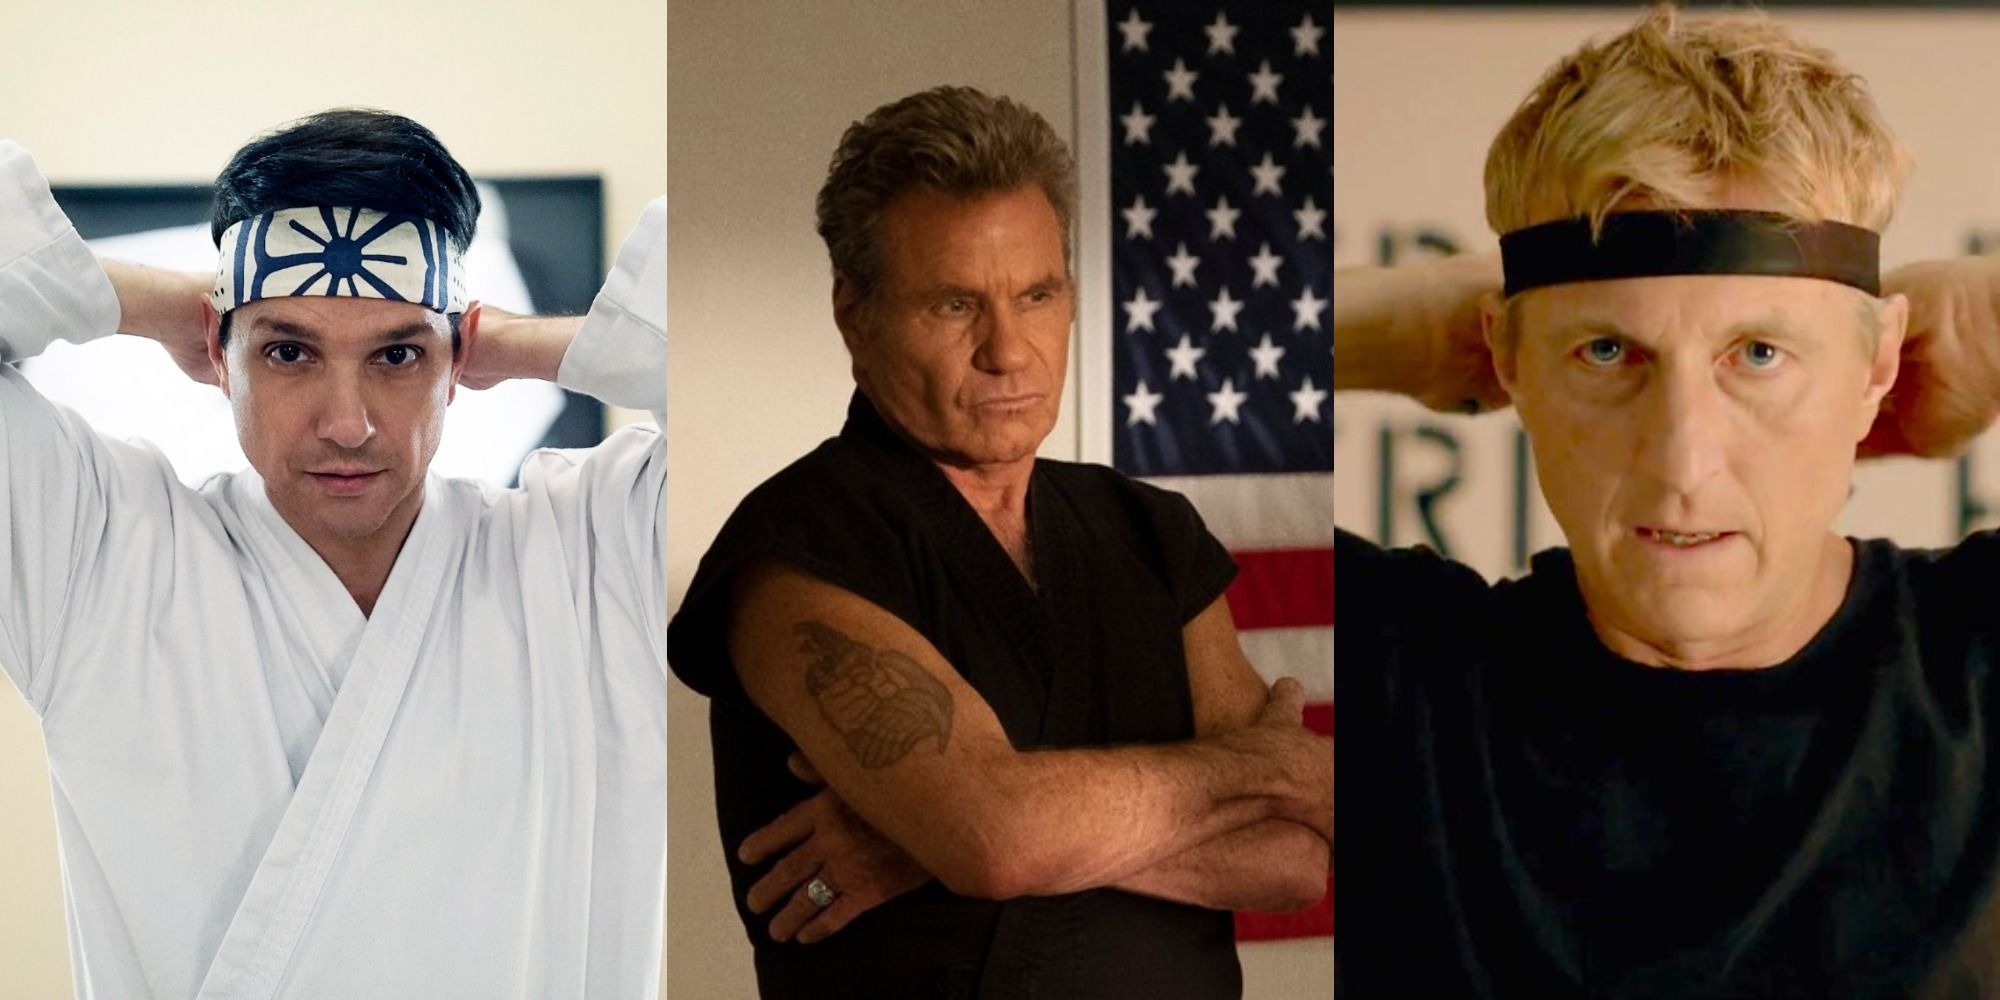 10 Cobra Kai Side Characters With Main Character Energy